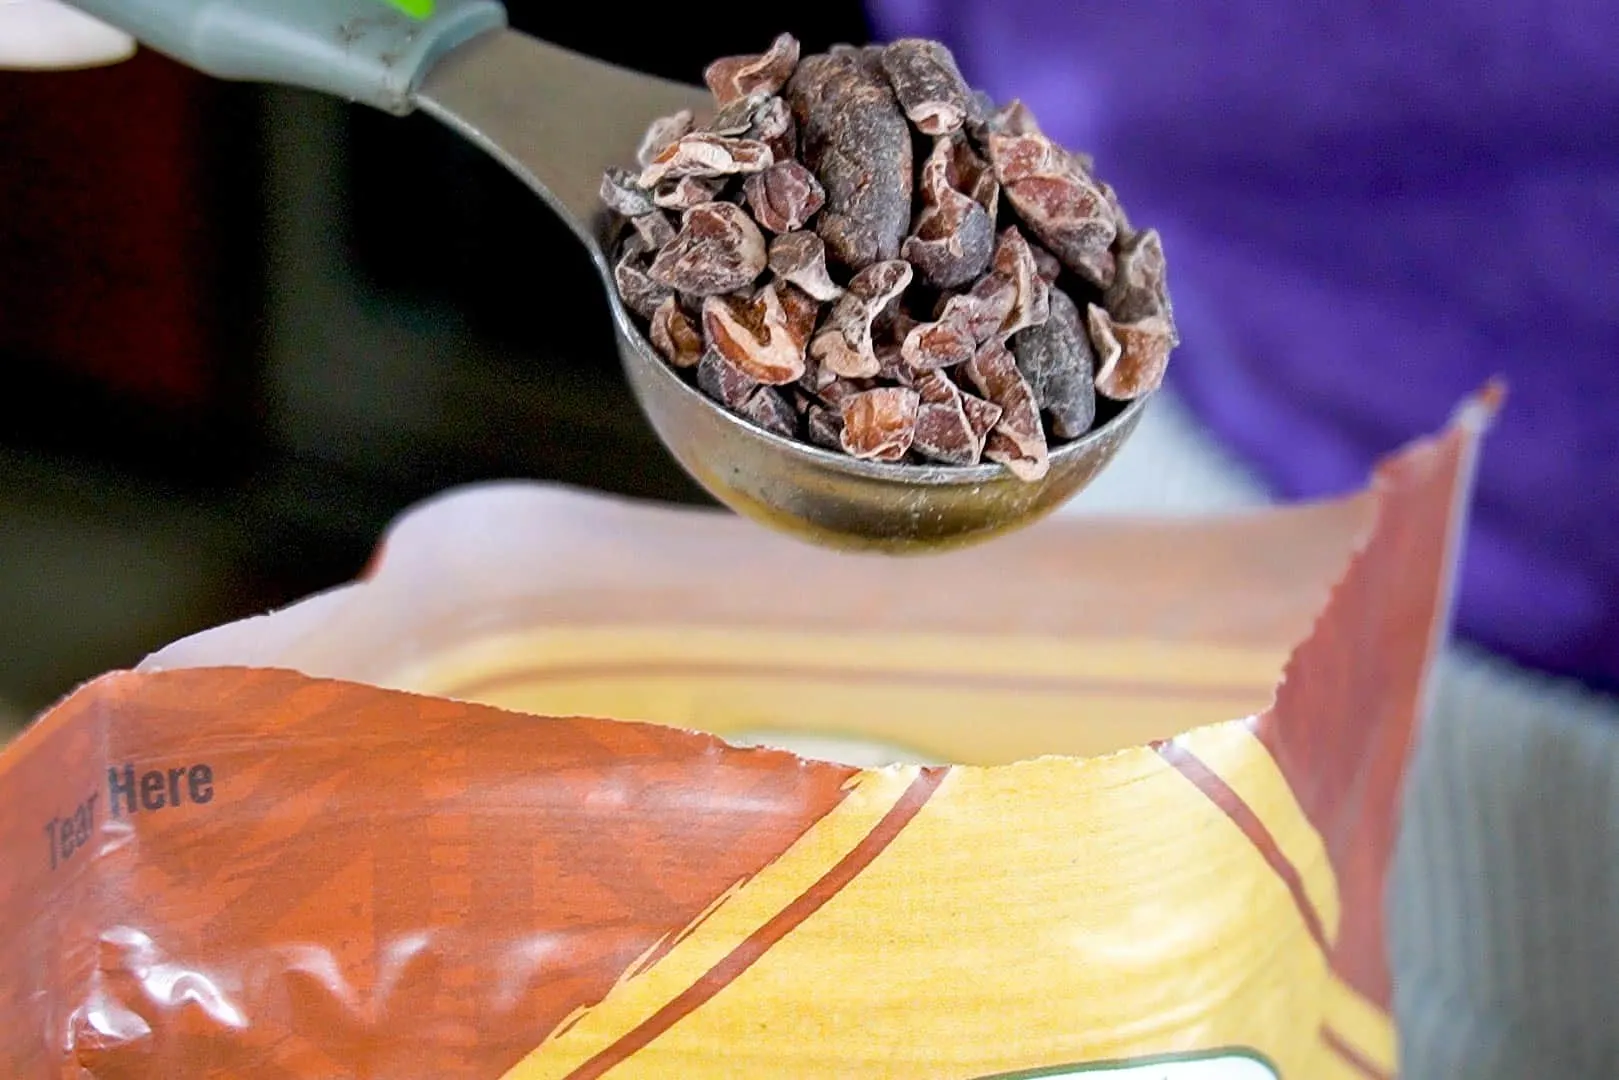 A tablespoon of cacao nibs